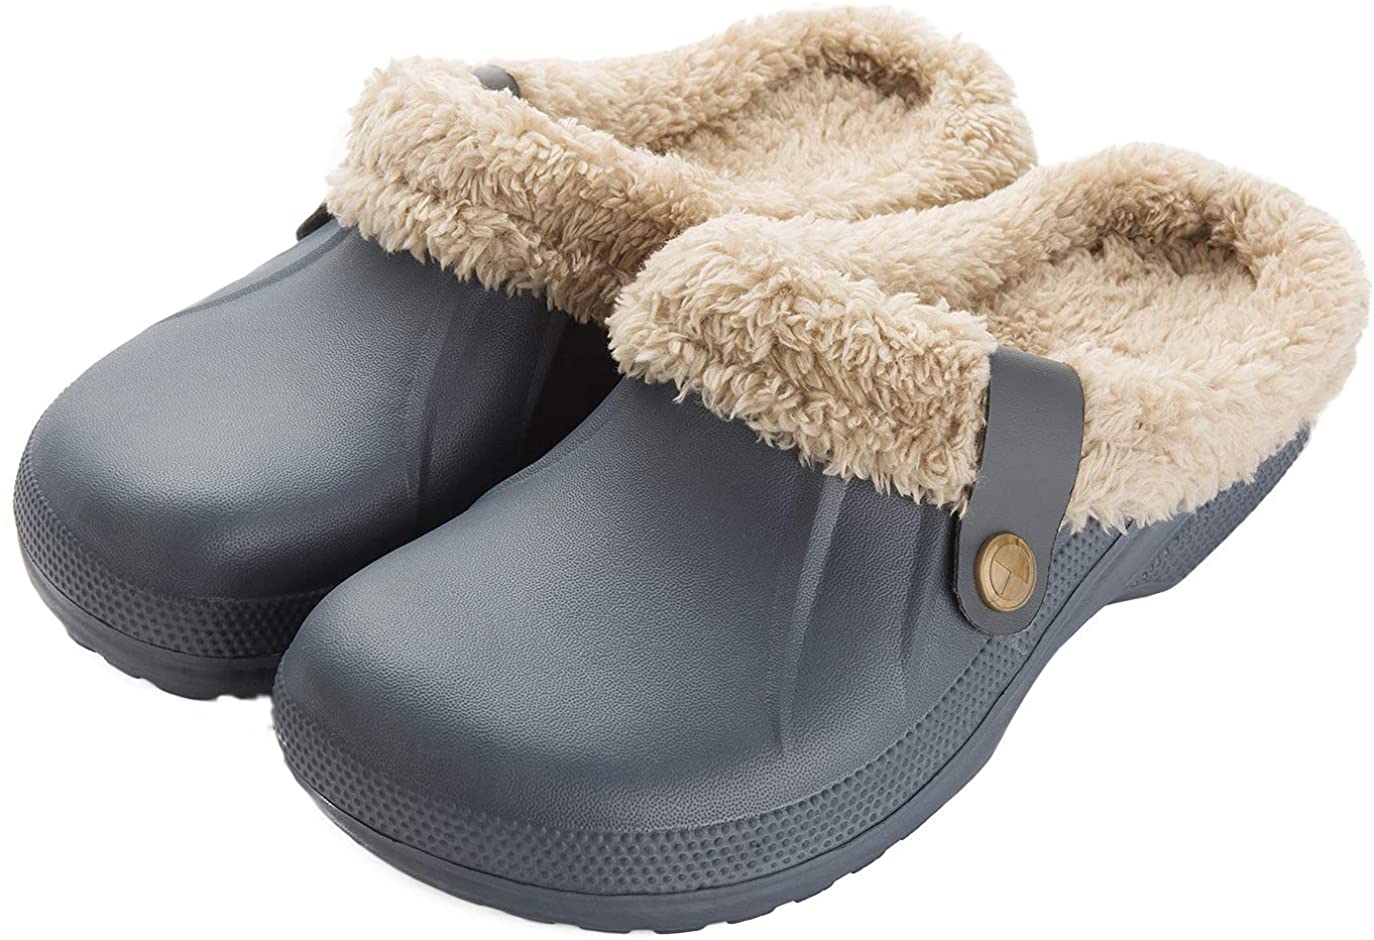 Womens Slippers with Fur Unisex Indoor Winter Warm Slippers Lined Home Slippers Waterproof Outdoor Garden Shoes